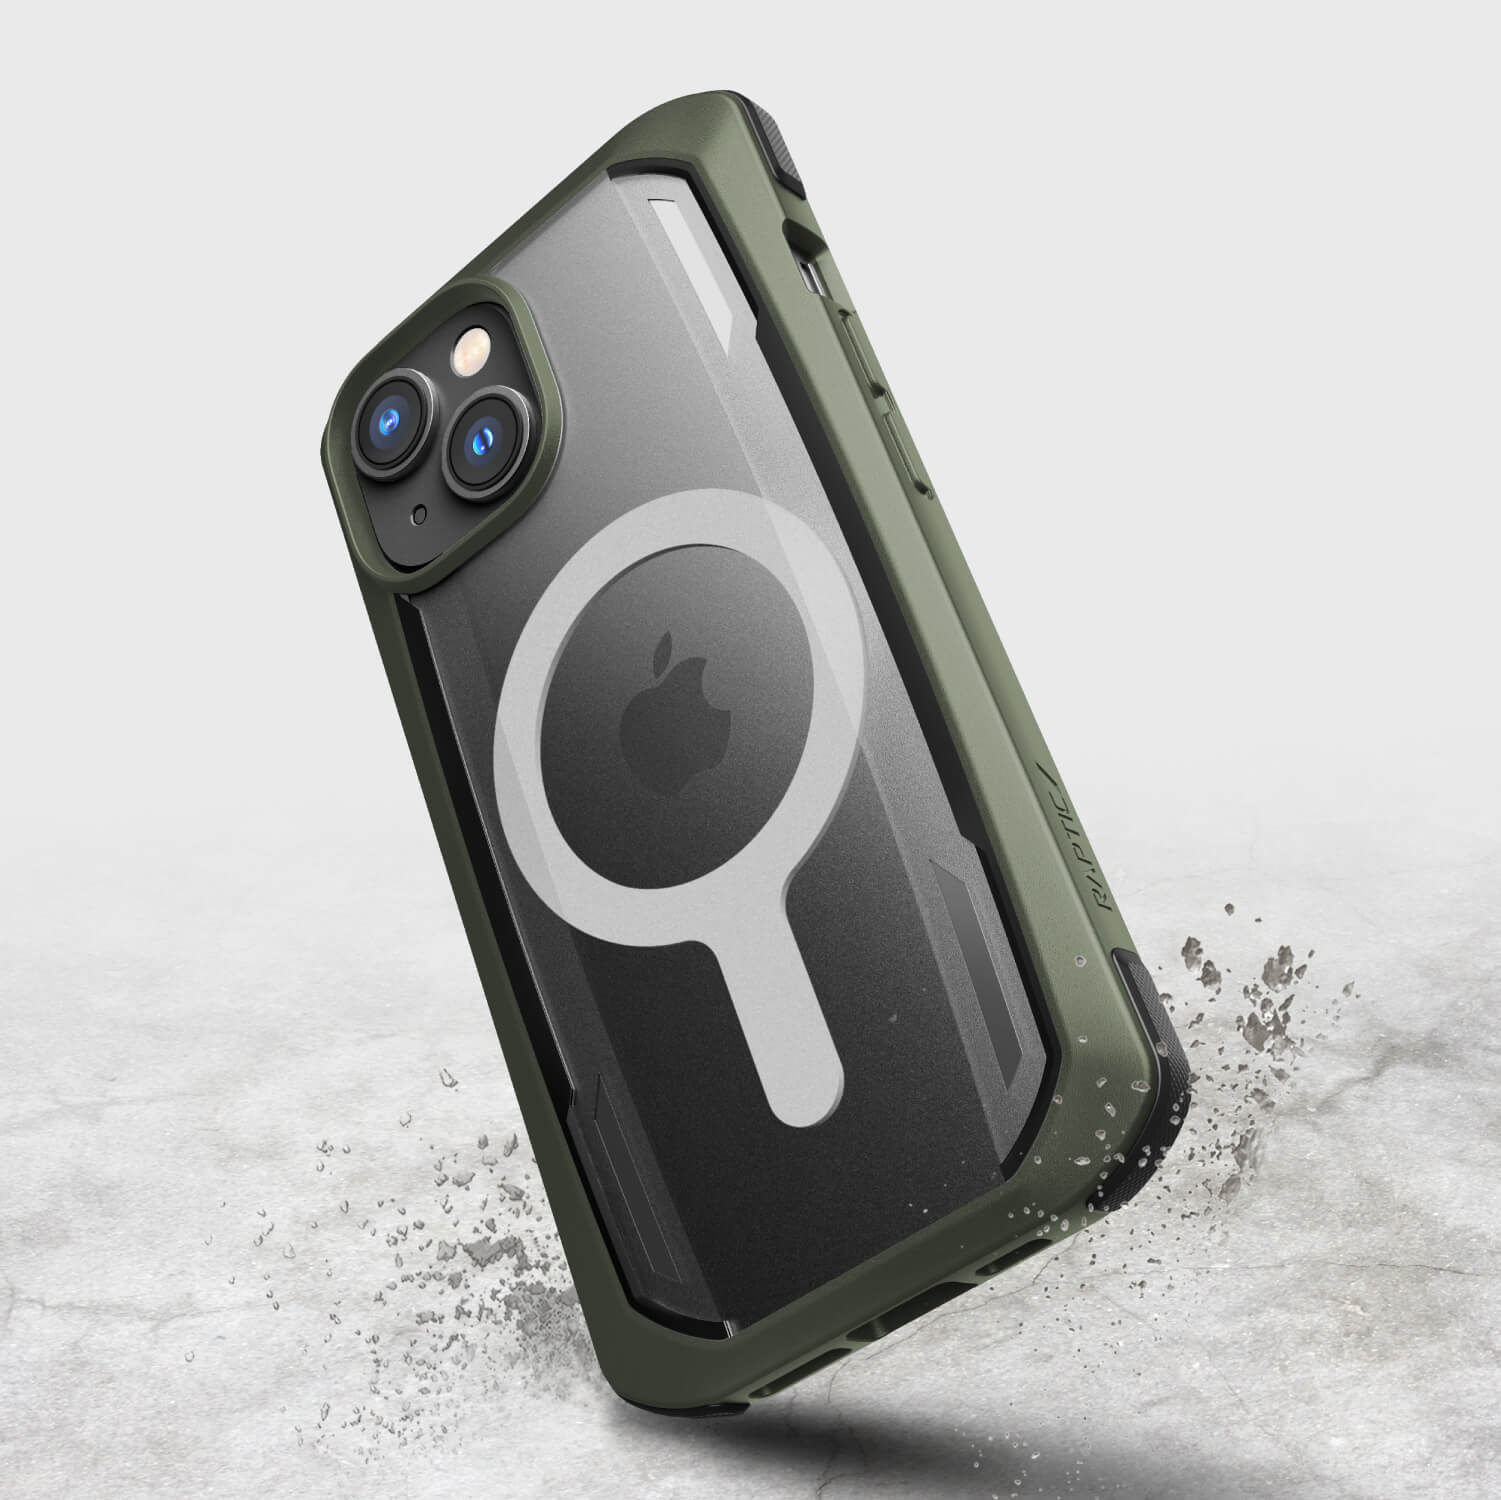 The iPhone 14 case by Raptic is shown in olive green.